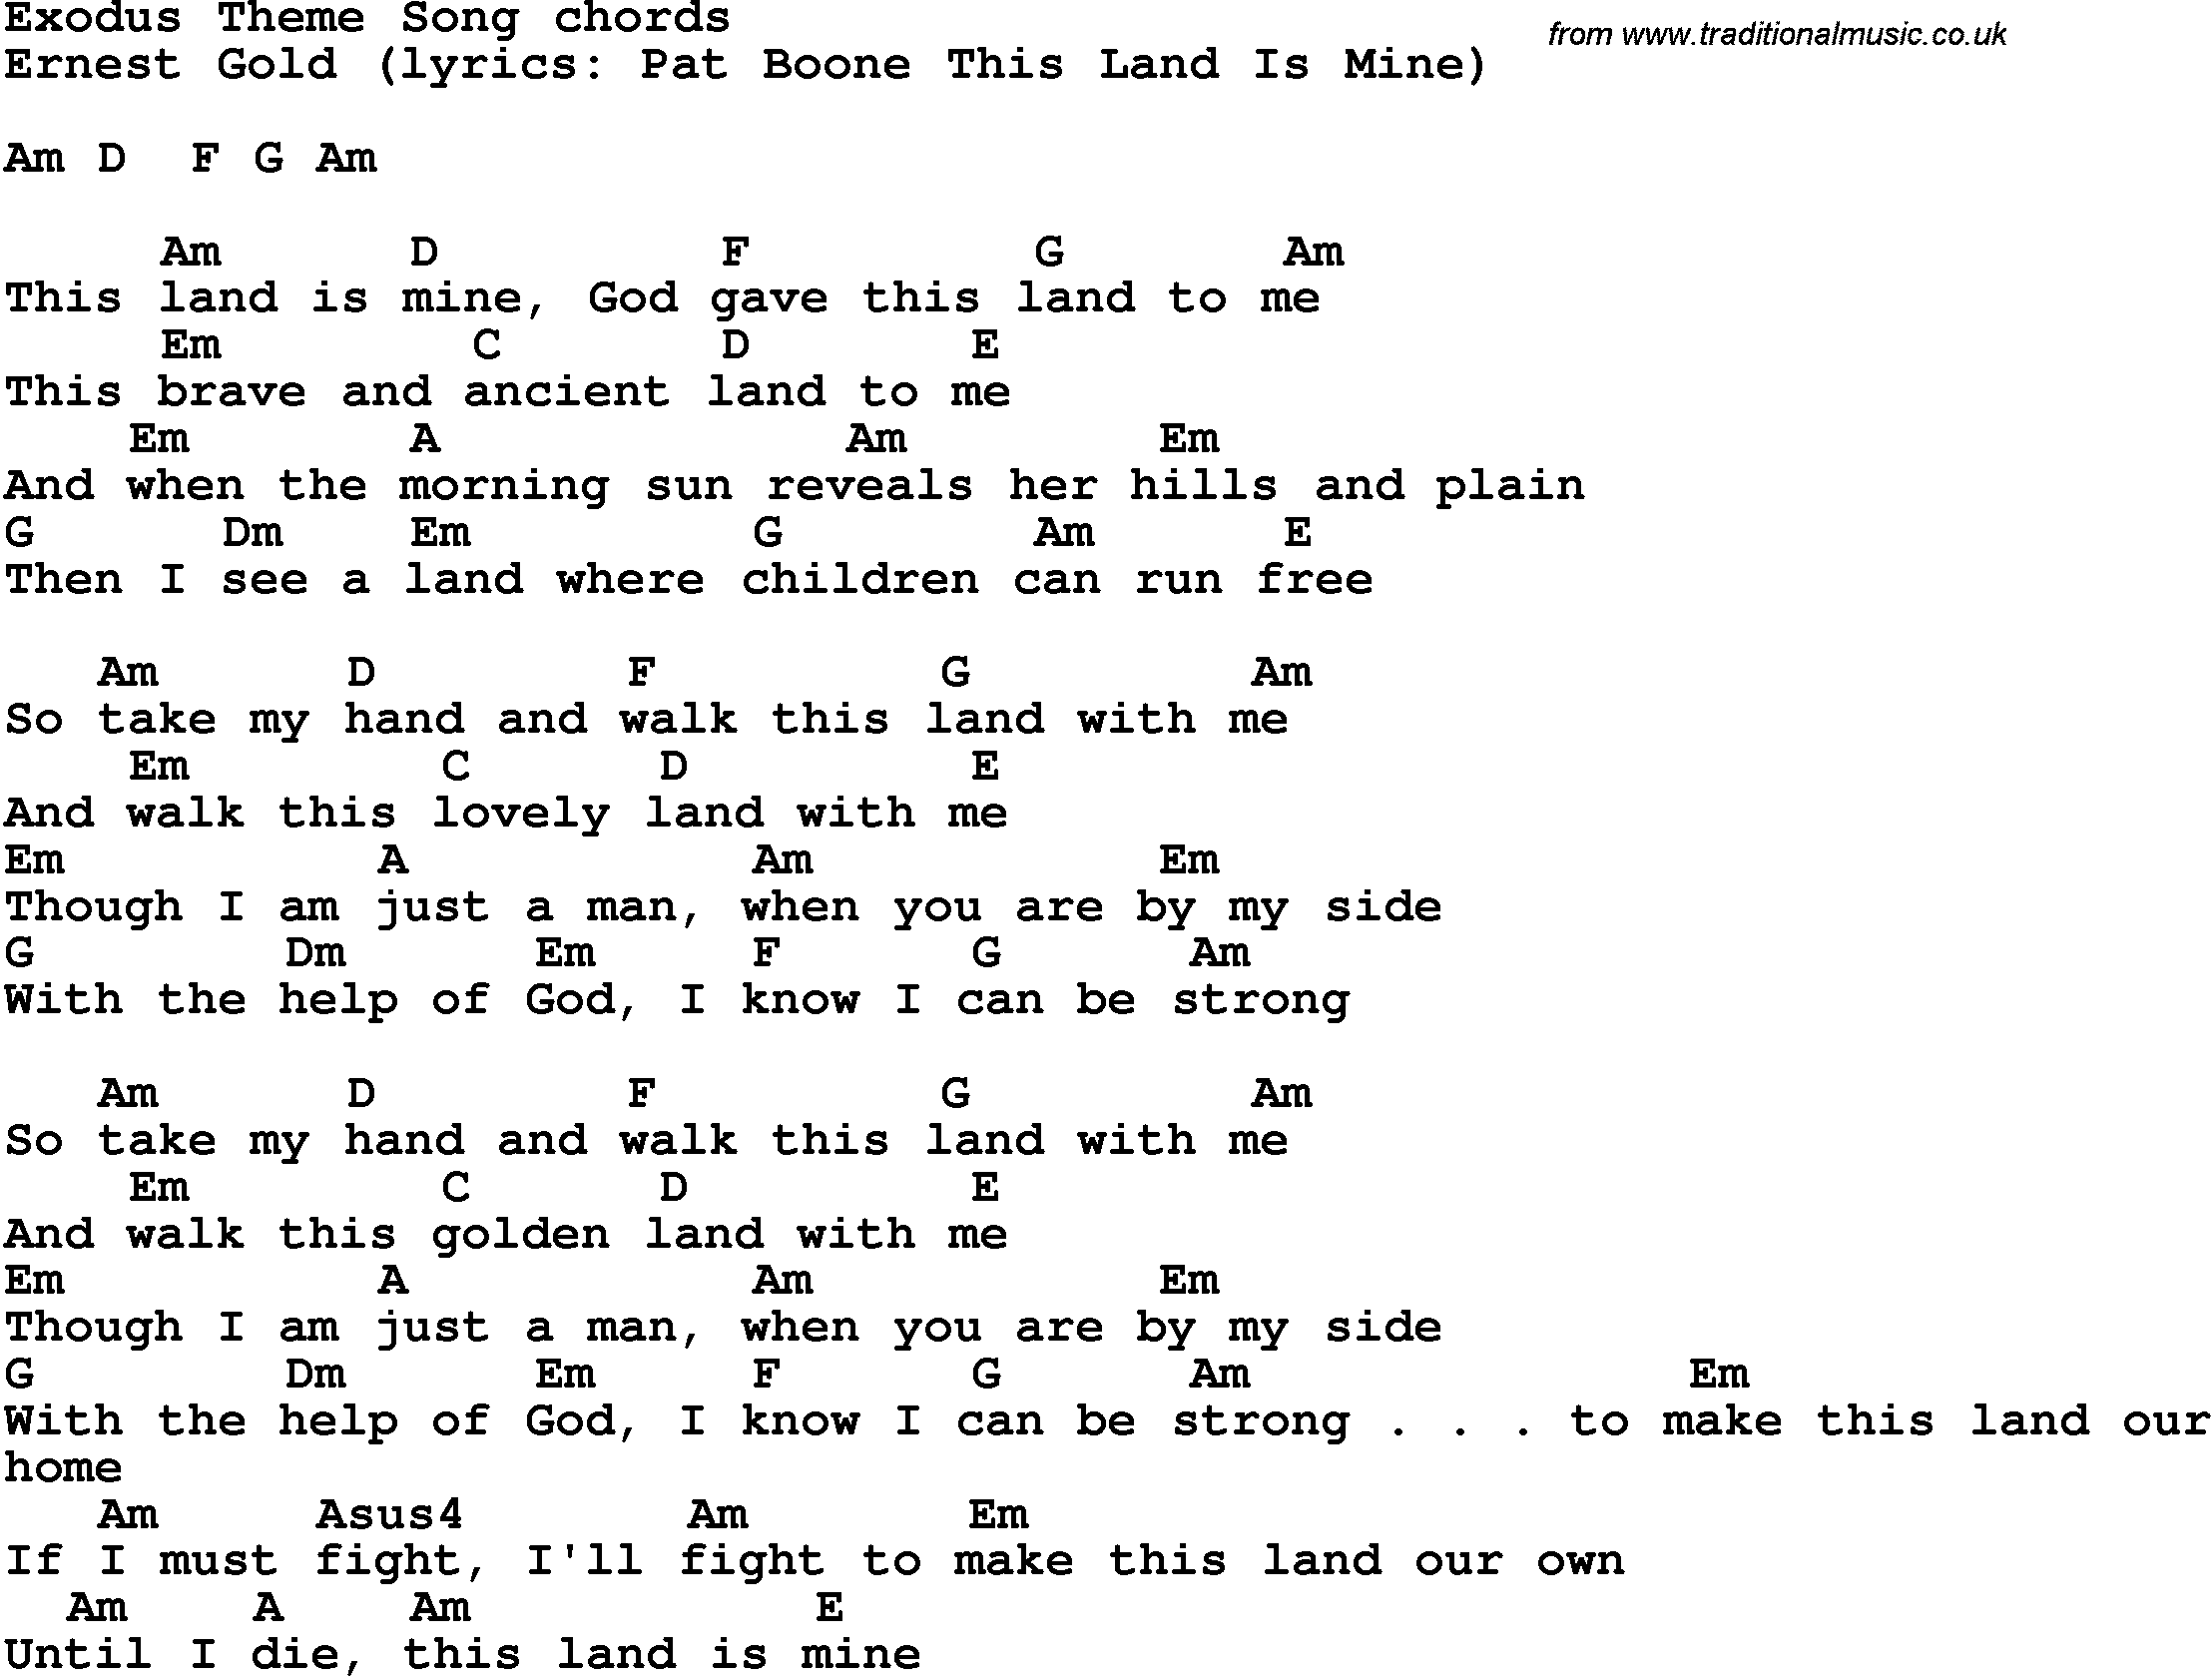 Song Lyrics with guitar chords for Exodus